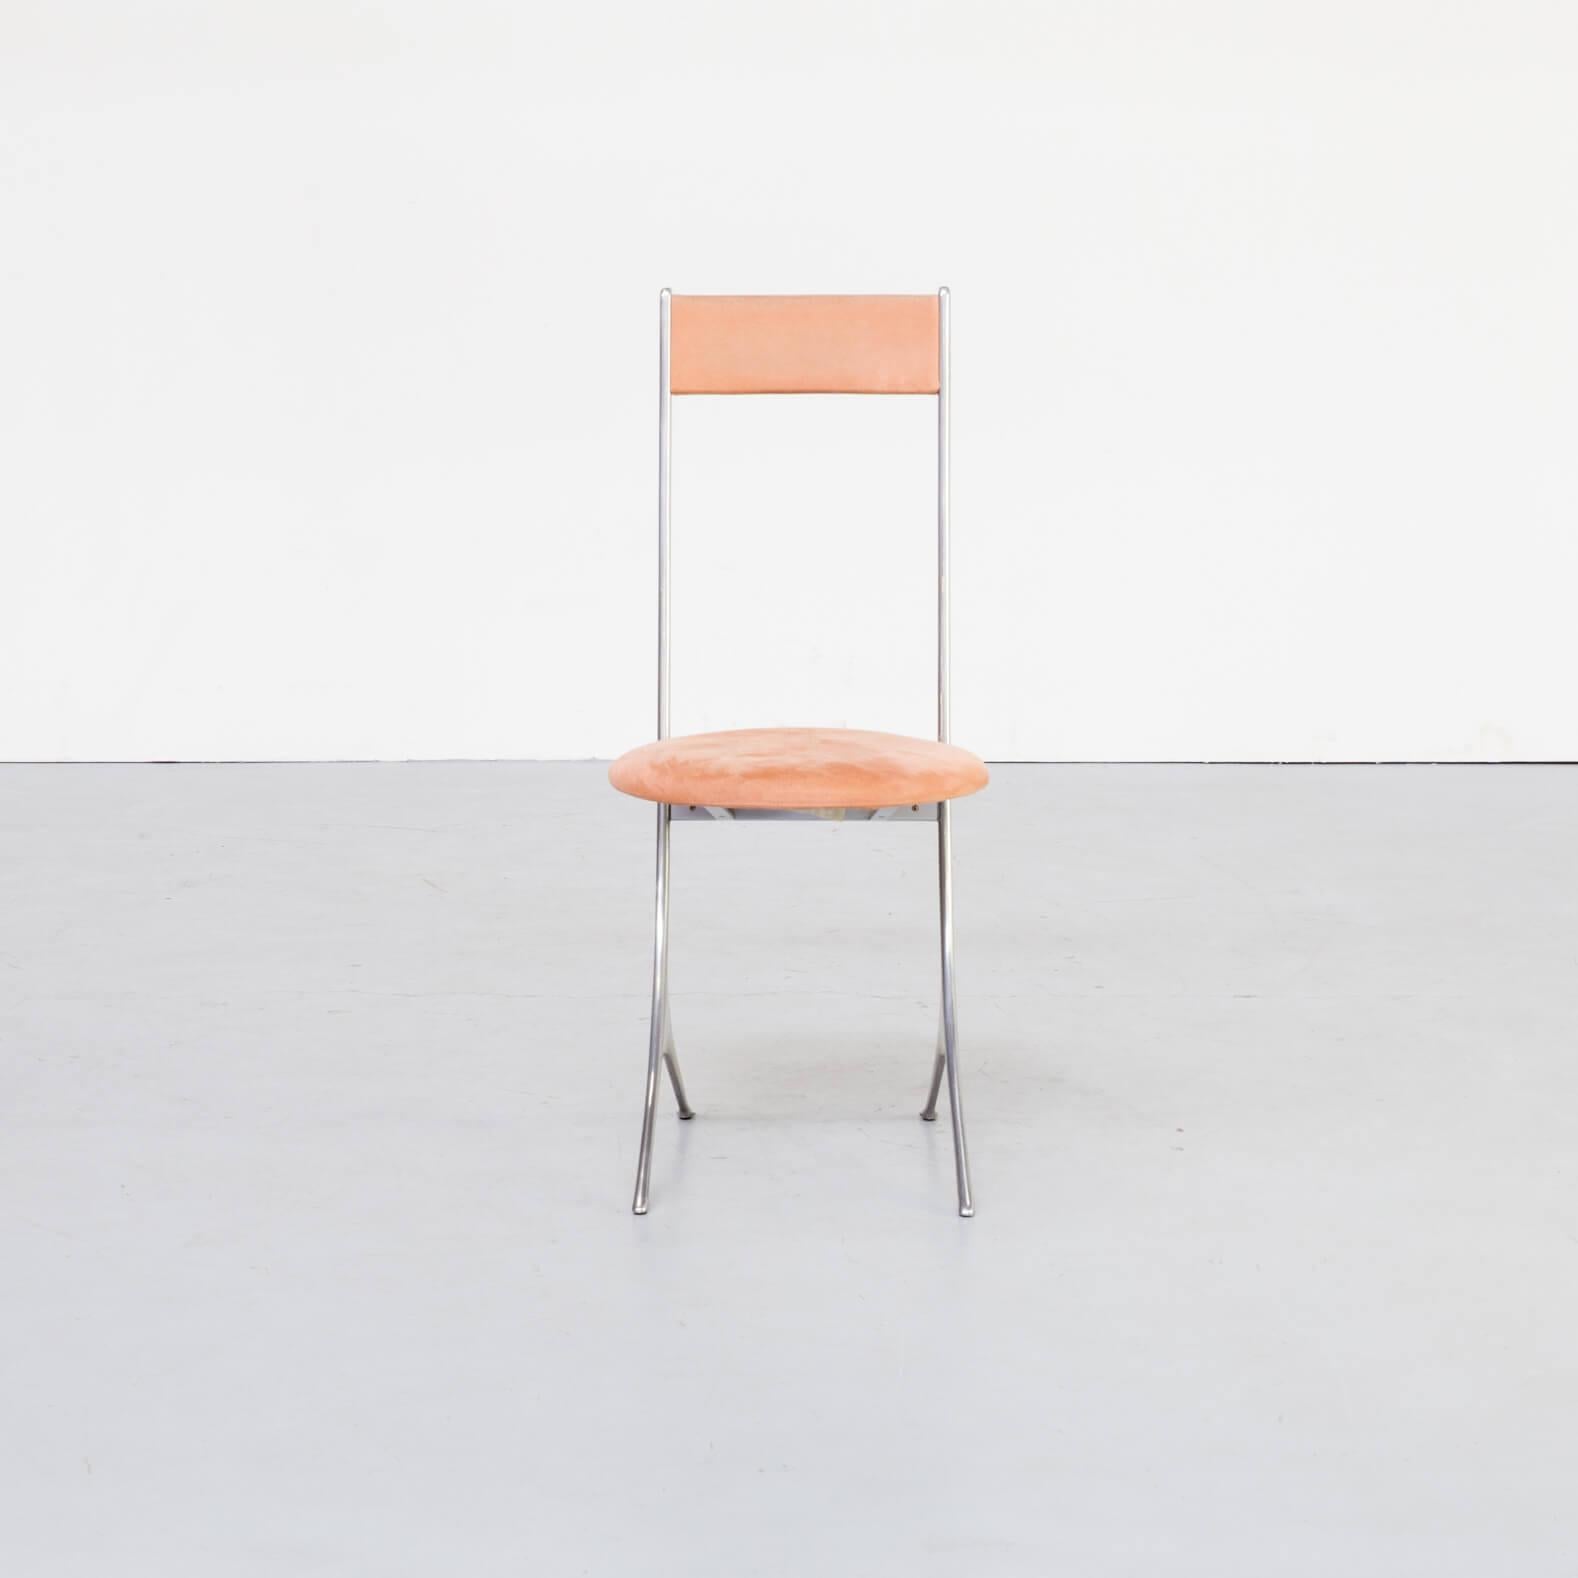 The well-known Italian furniture manufacturer was founded in the mid-1950s by Aurelio Zanotta and still enjoys a high reputation in the furniture design environment. Zanotta creates innovations with a museum character. This rare high back small side